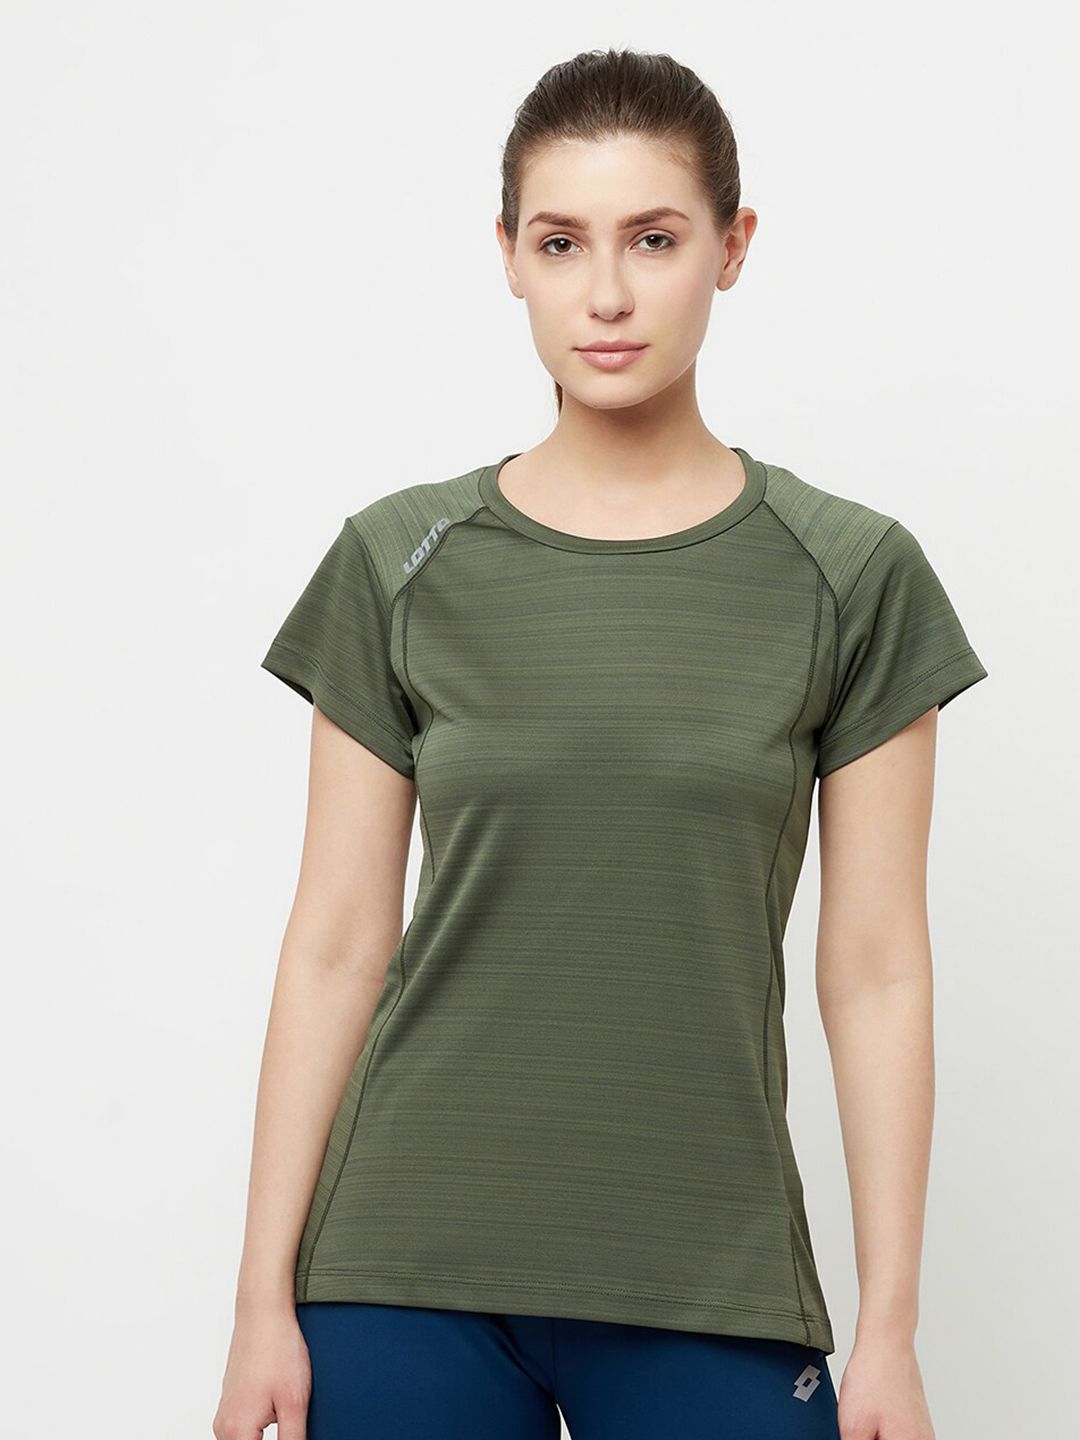 Lotto Women Olive Green Sports Outdoor T-shirt Price in India